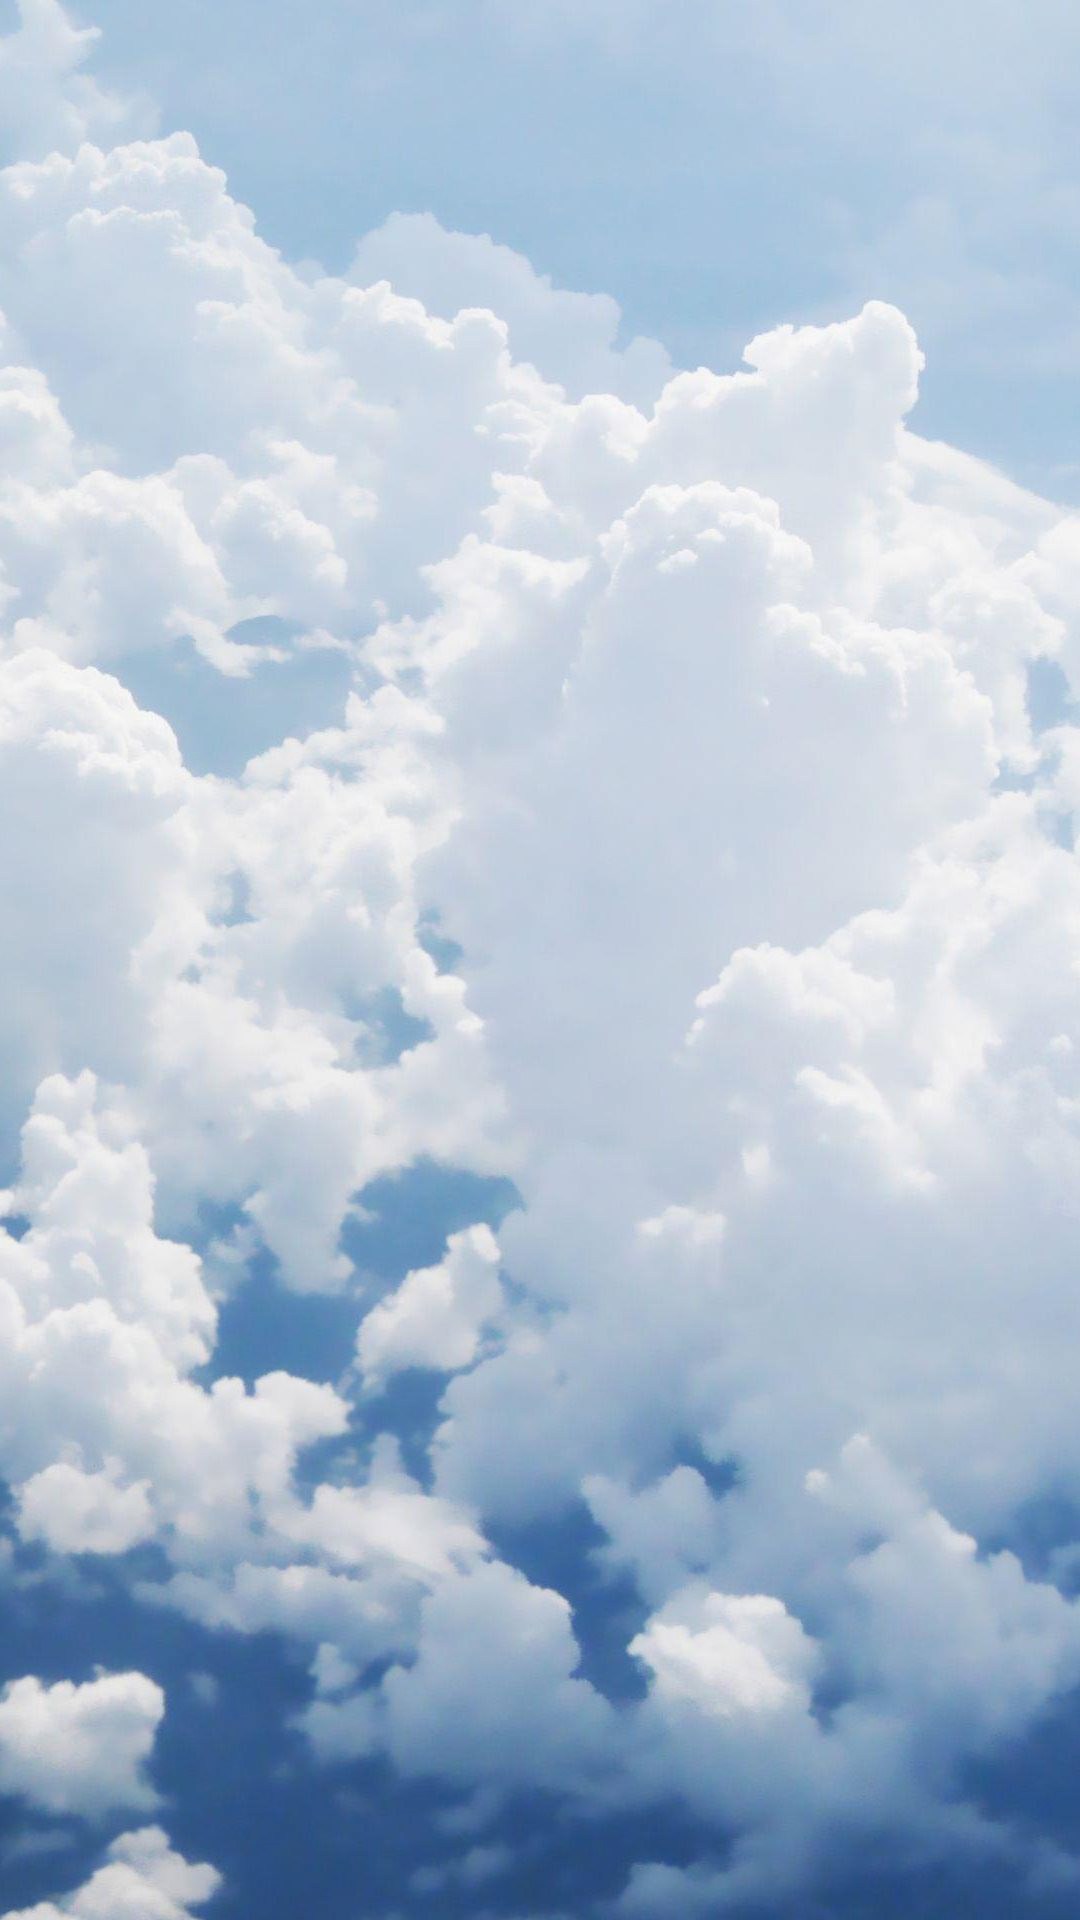 1080x1920 Puffy Clouds Baby Blue Sky Android Wallpaper free download. Puffy Clouds Baby  Blue Sky Android Wallpaper Free Download